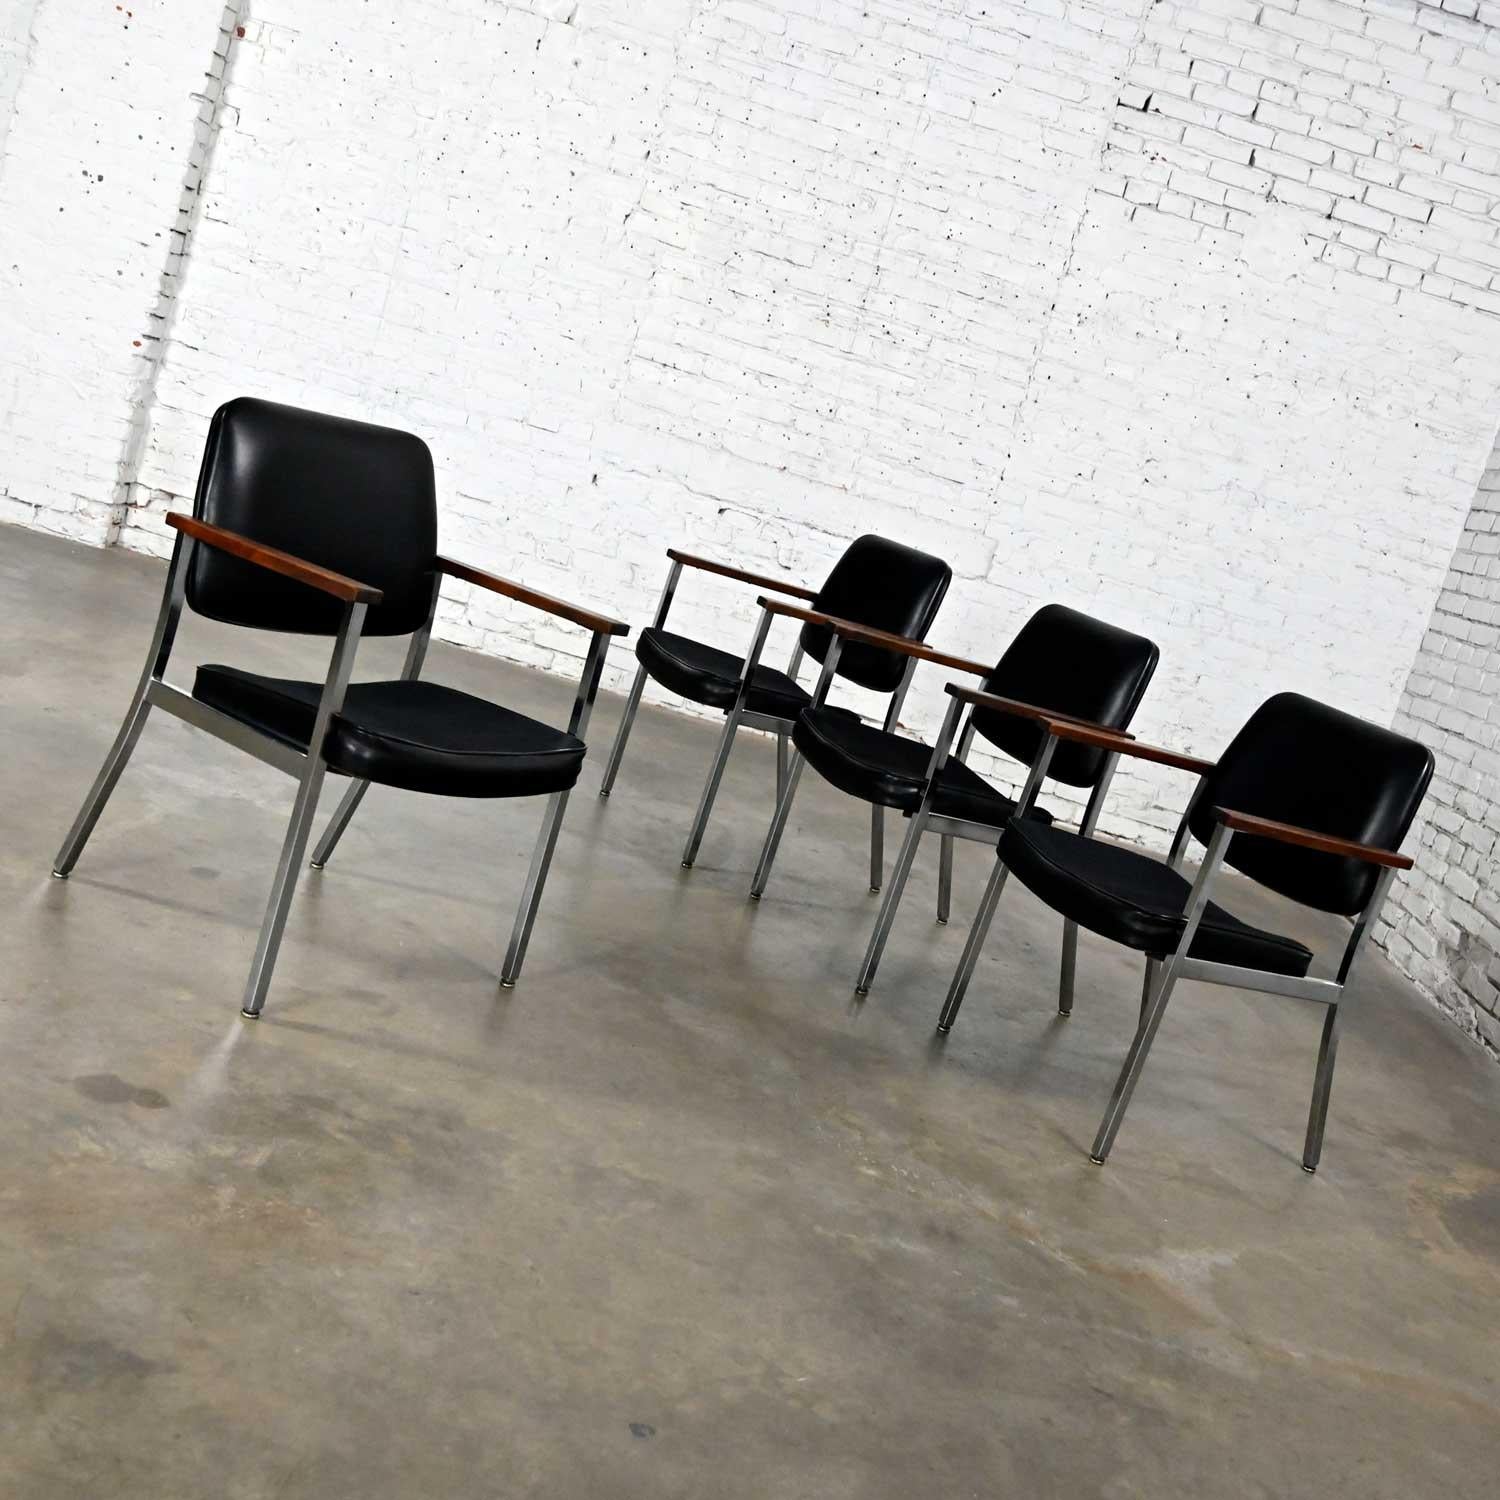 Wonderful mid-century Industrial set of 4 dining or office chairs comprised of chrome frames, black vinyl seats and backs, and wood arms by Superior Chaircraft. Beautiful condition, keeping in mind that these are vintage and not new so will have